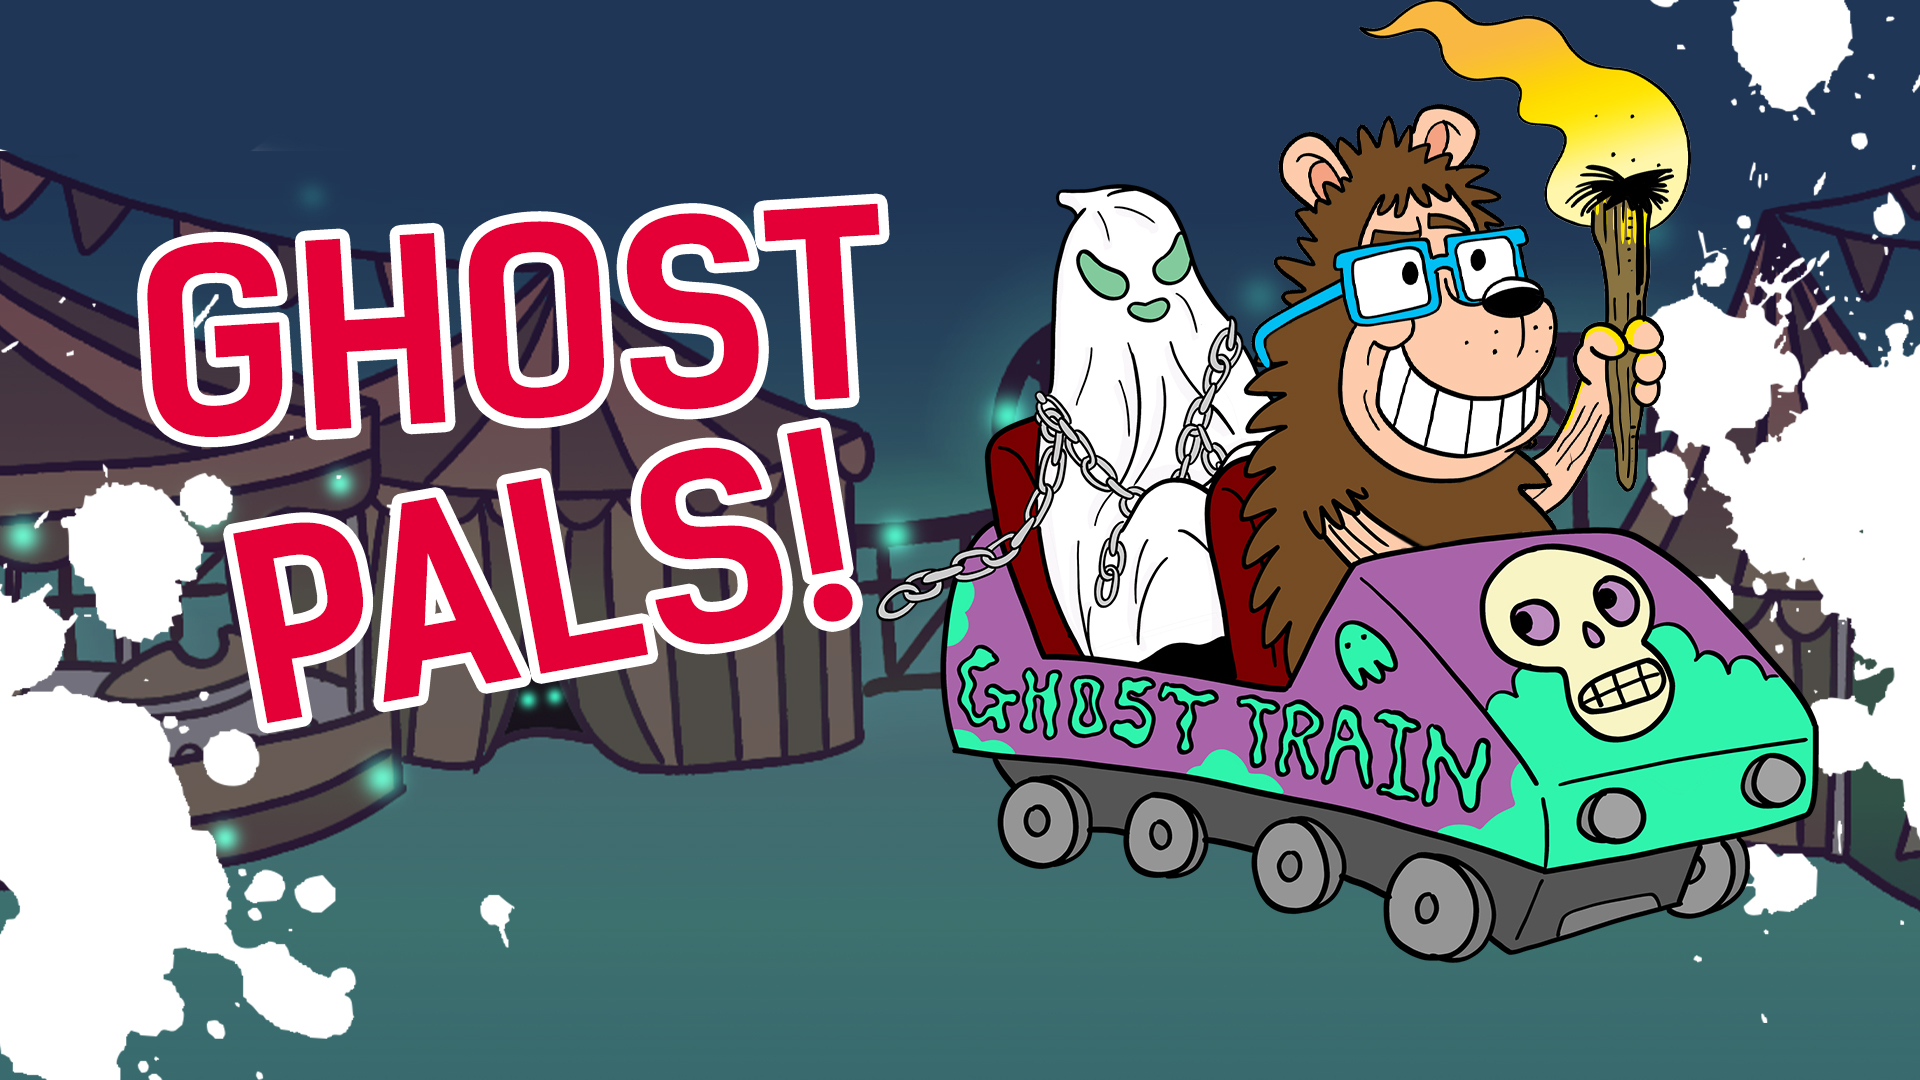 Result: Ghost pals